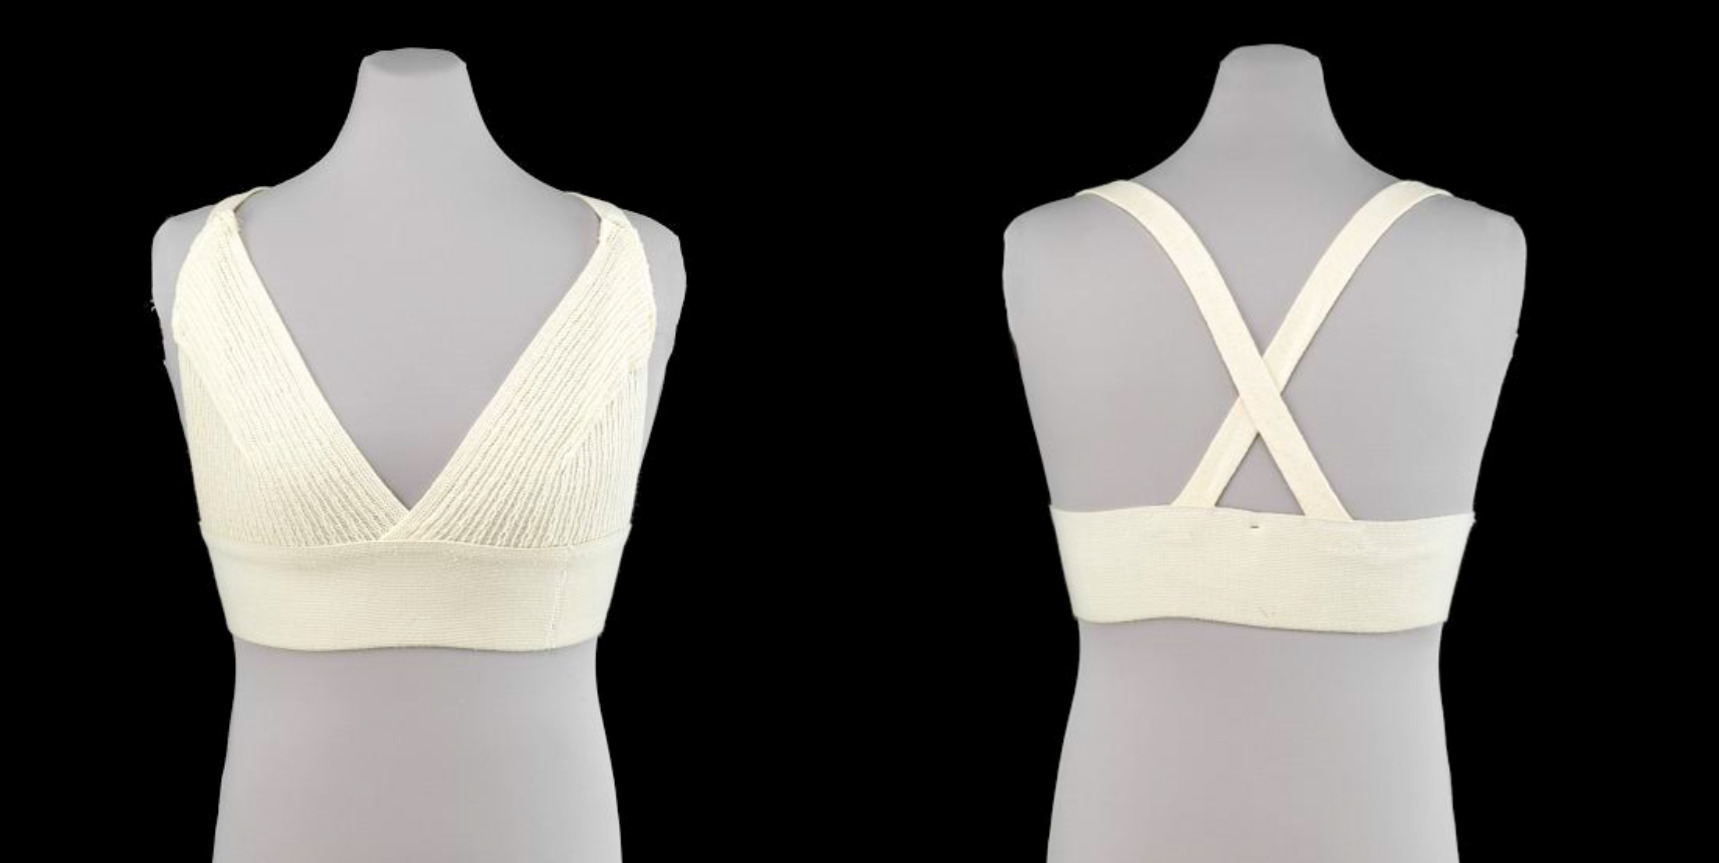 Two N.J. women who invented the sports bra are being inducted into